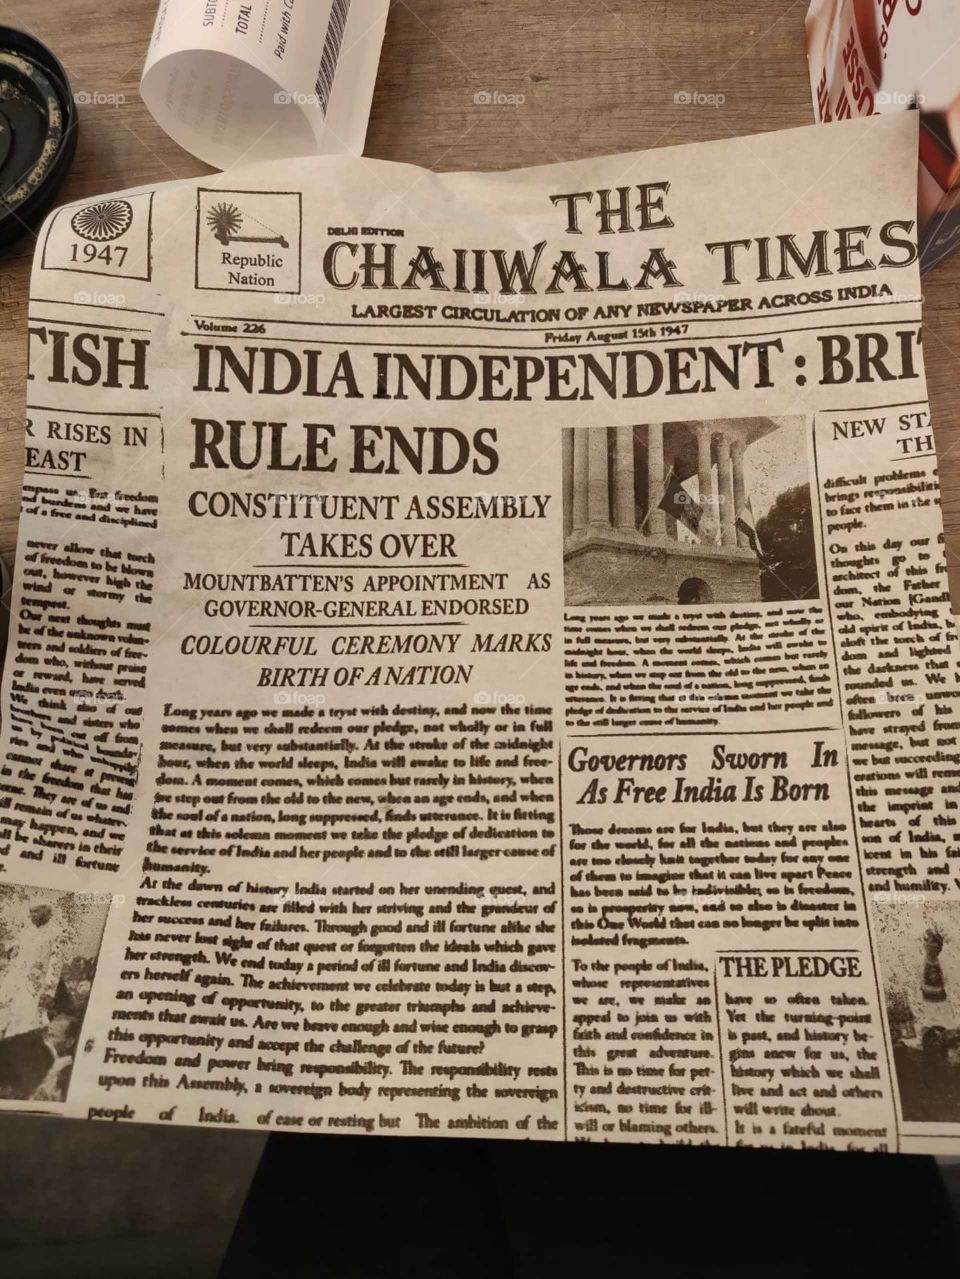 # old paper# India's independence day time# 15th August 1947# chaiwala coffee shop#